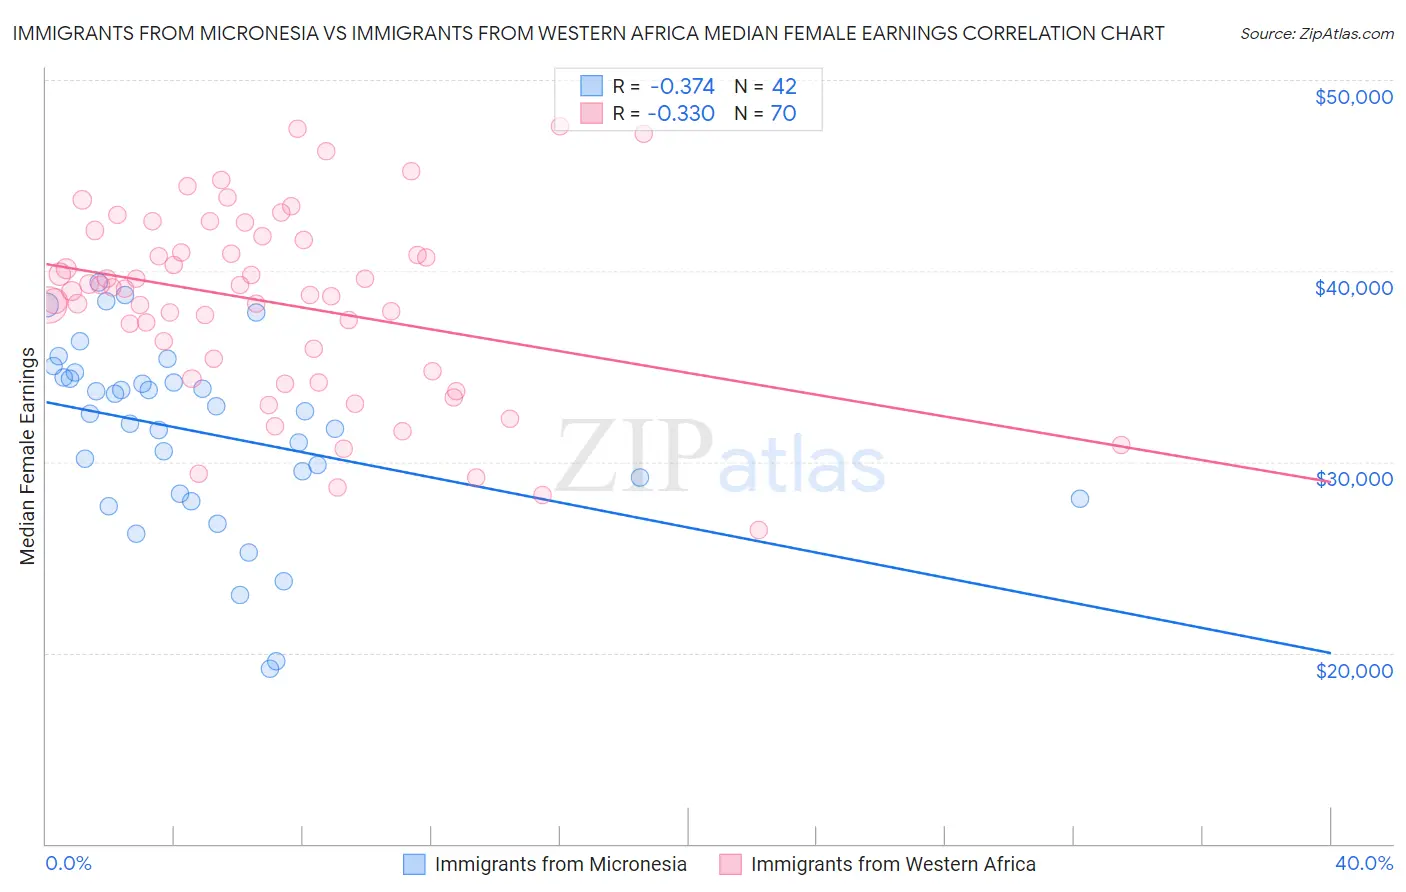 Immigrants from Micronesia vs Immigrants from Western Africa Median Female Earnings